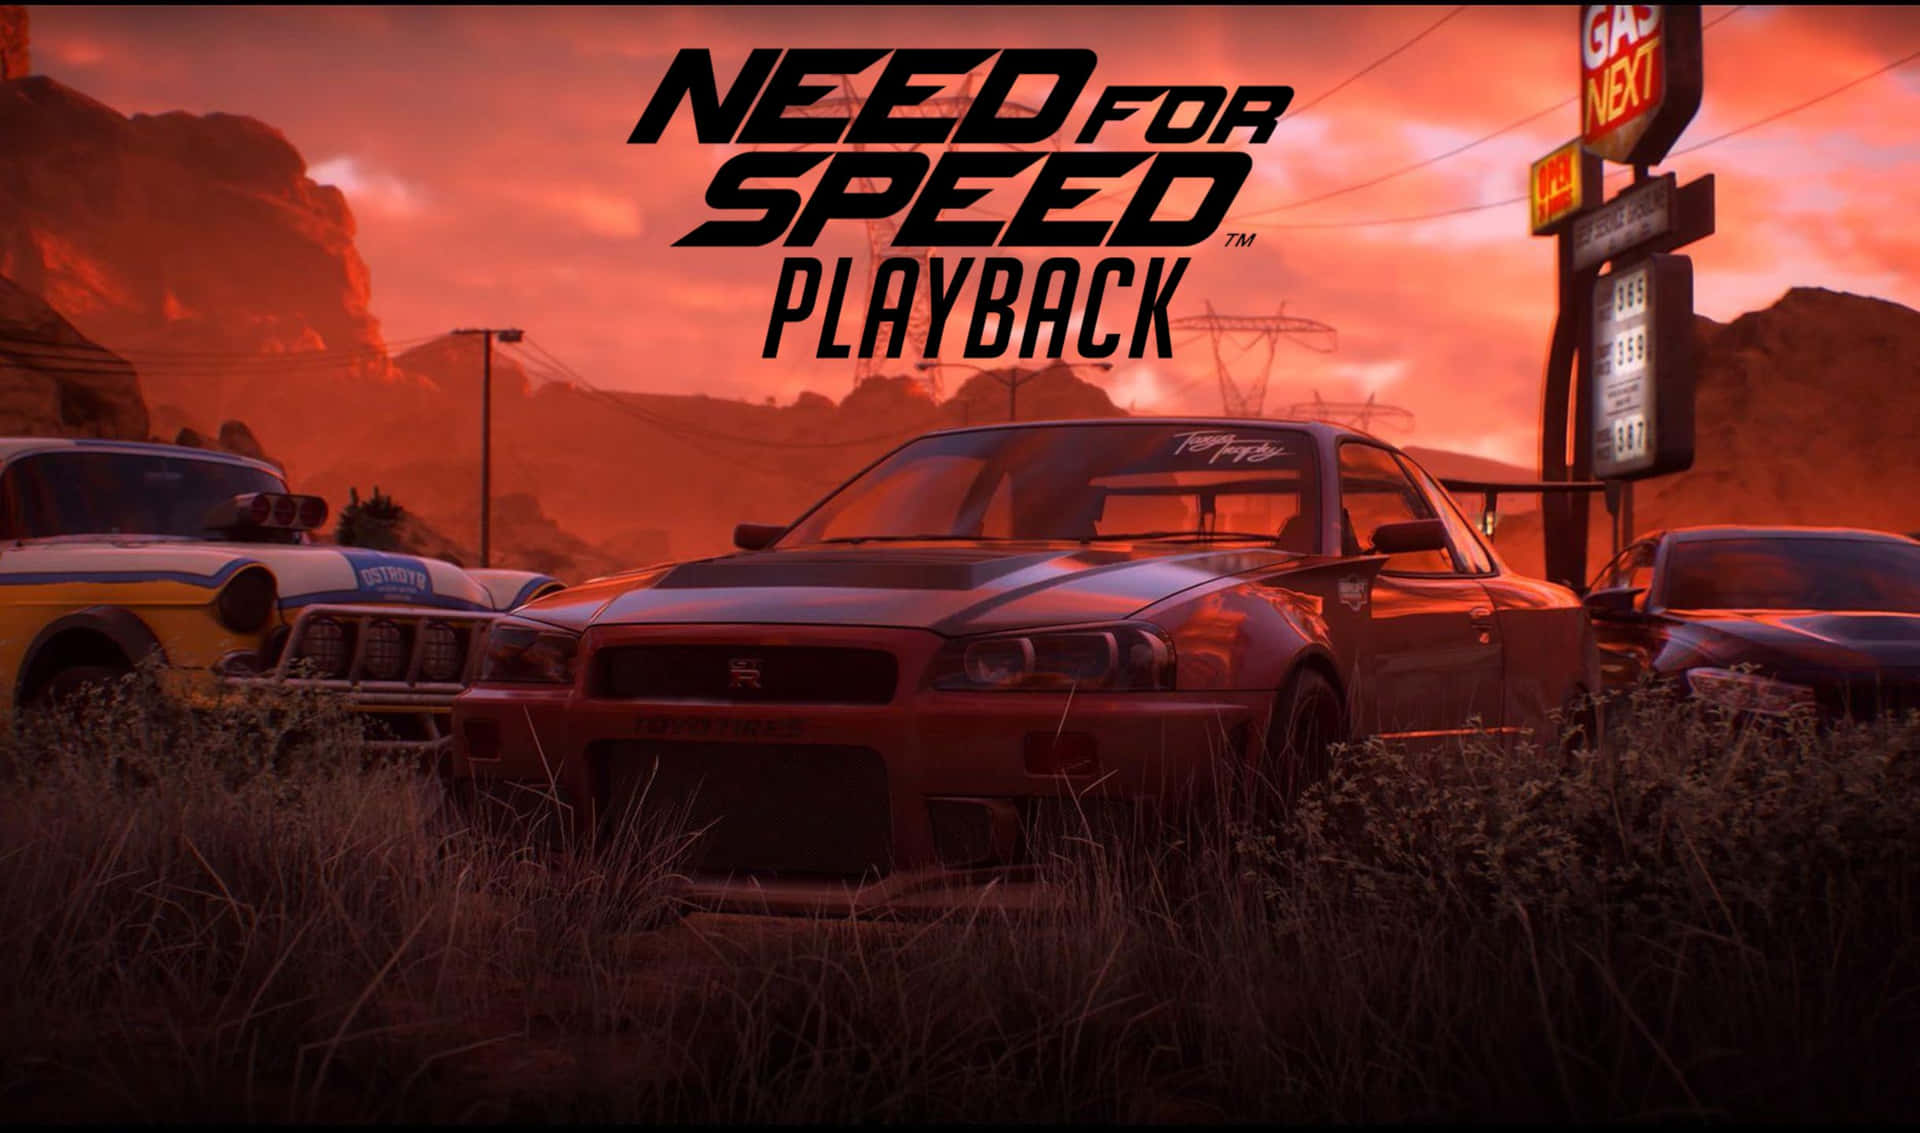 Need For Speed Playback - Pc